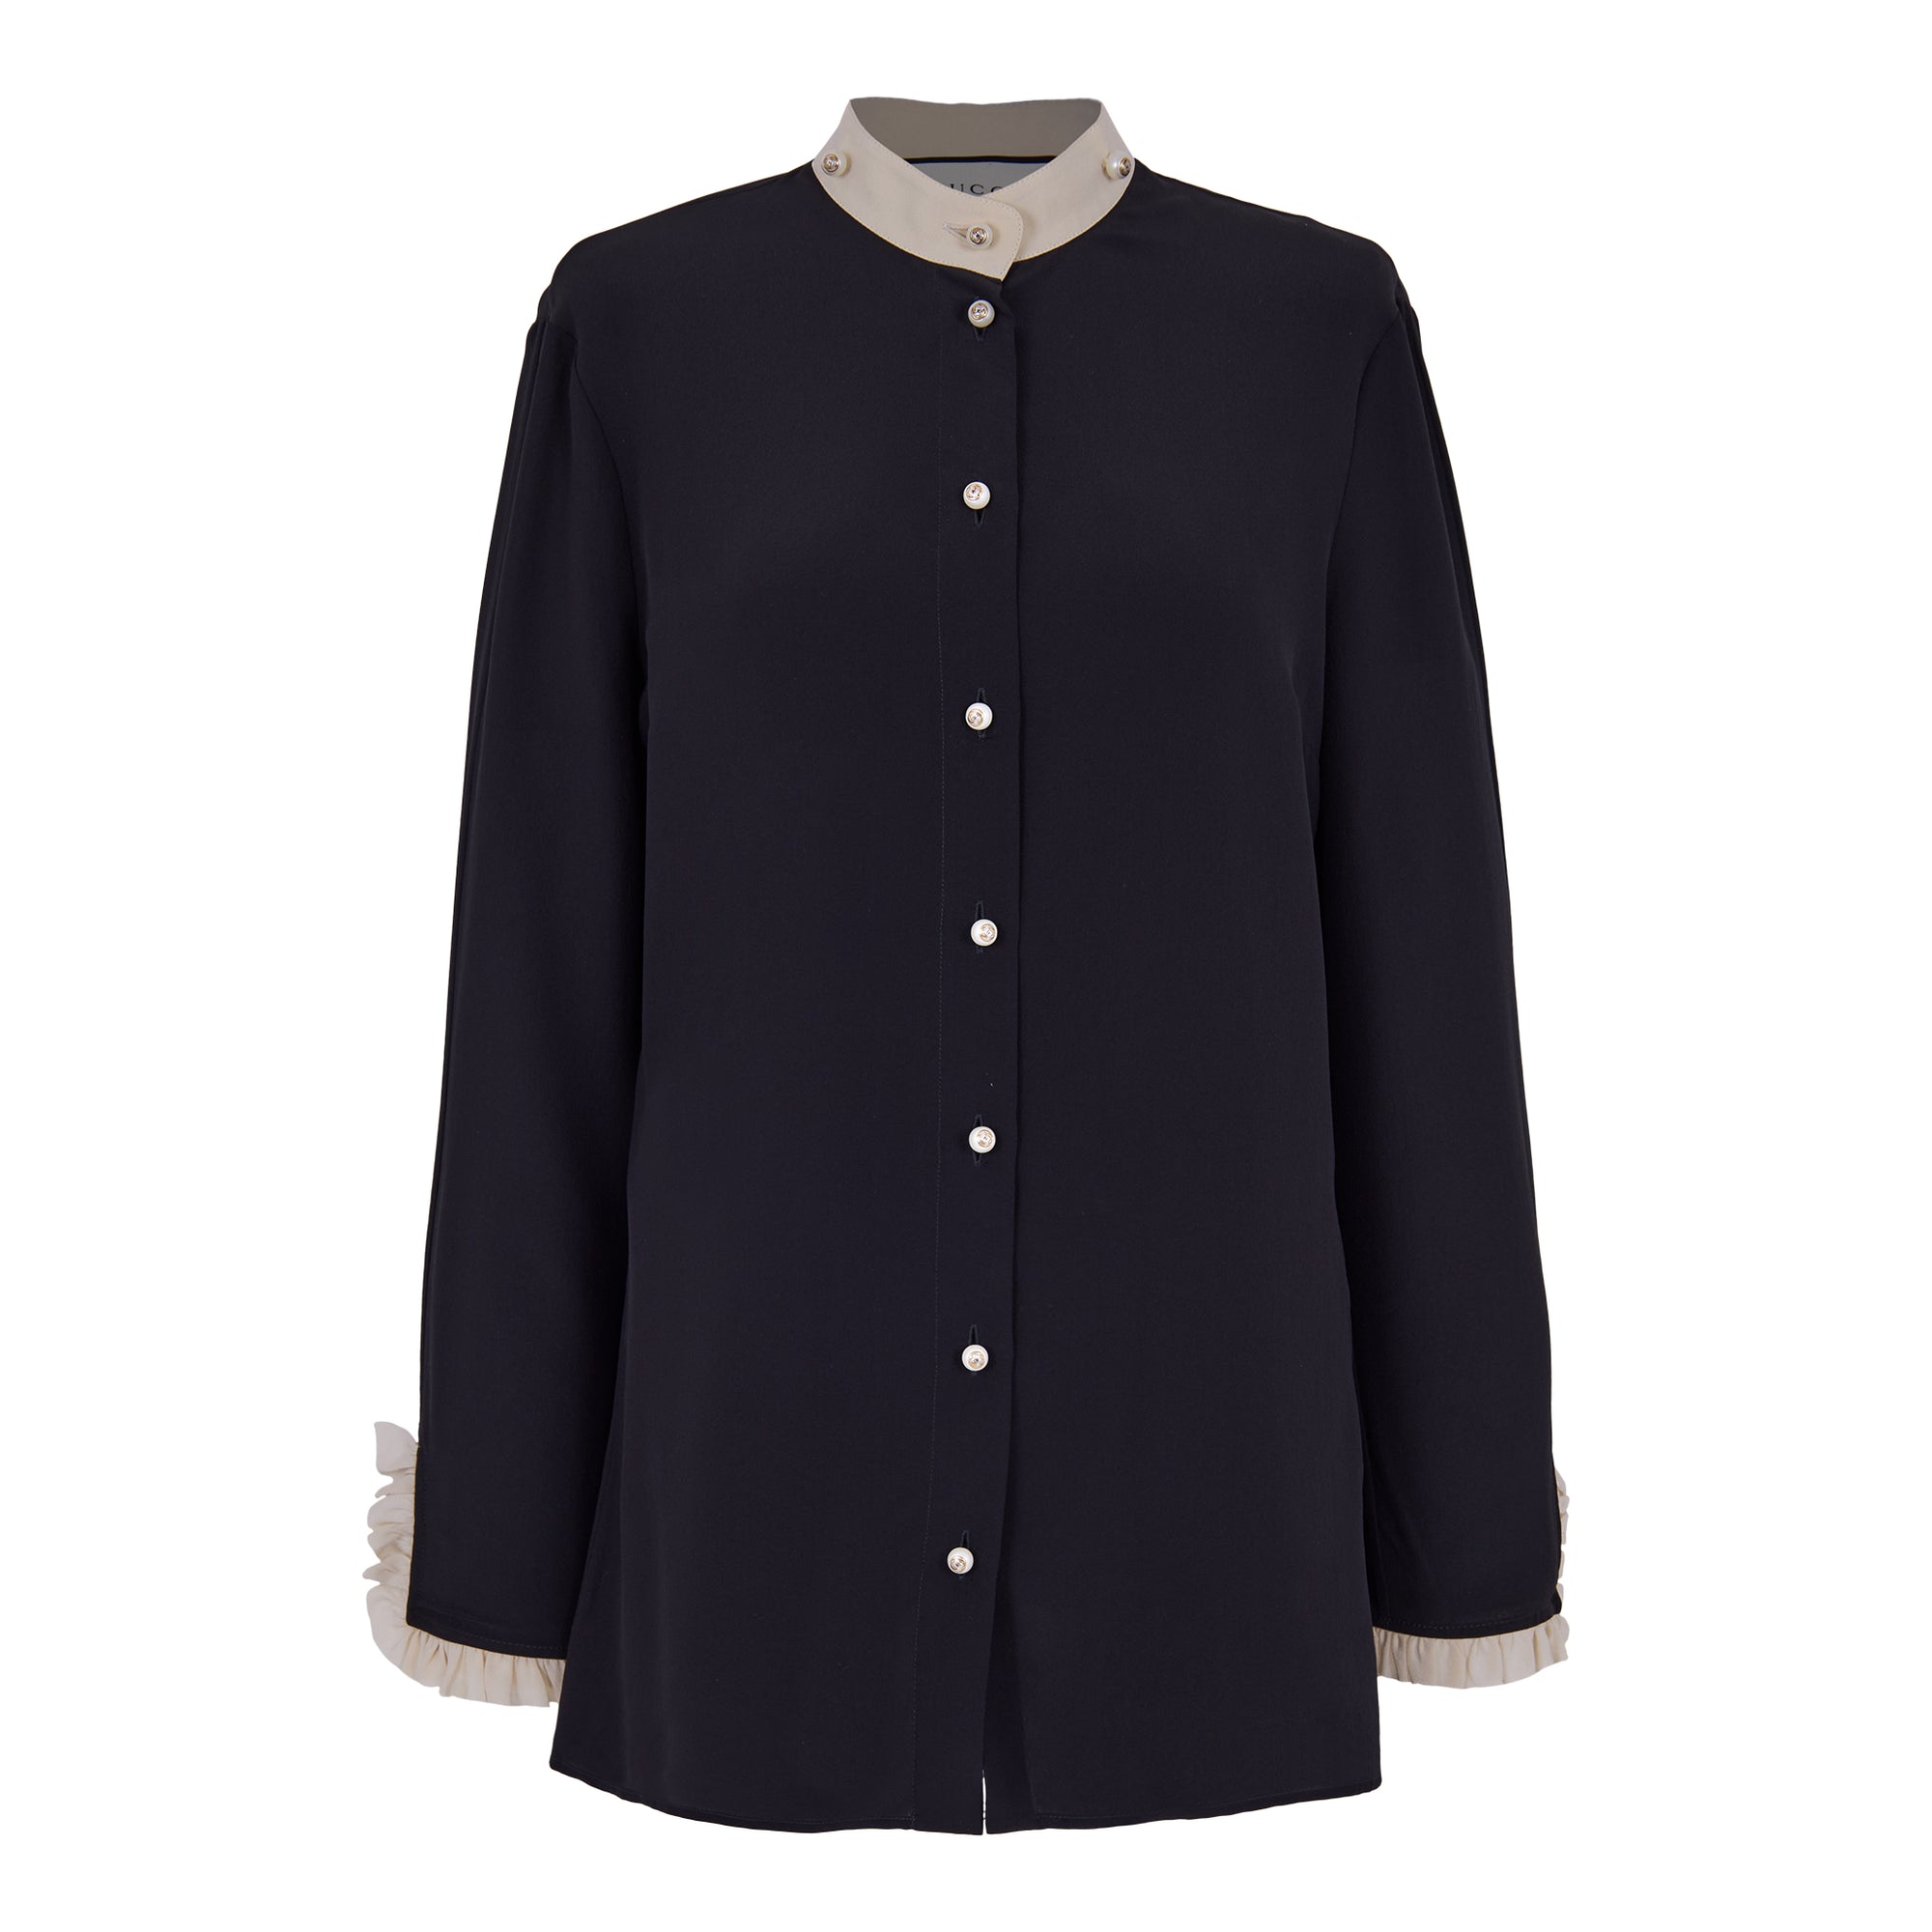 Gucci Black Silk Shirt with pearl buttons